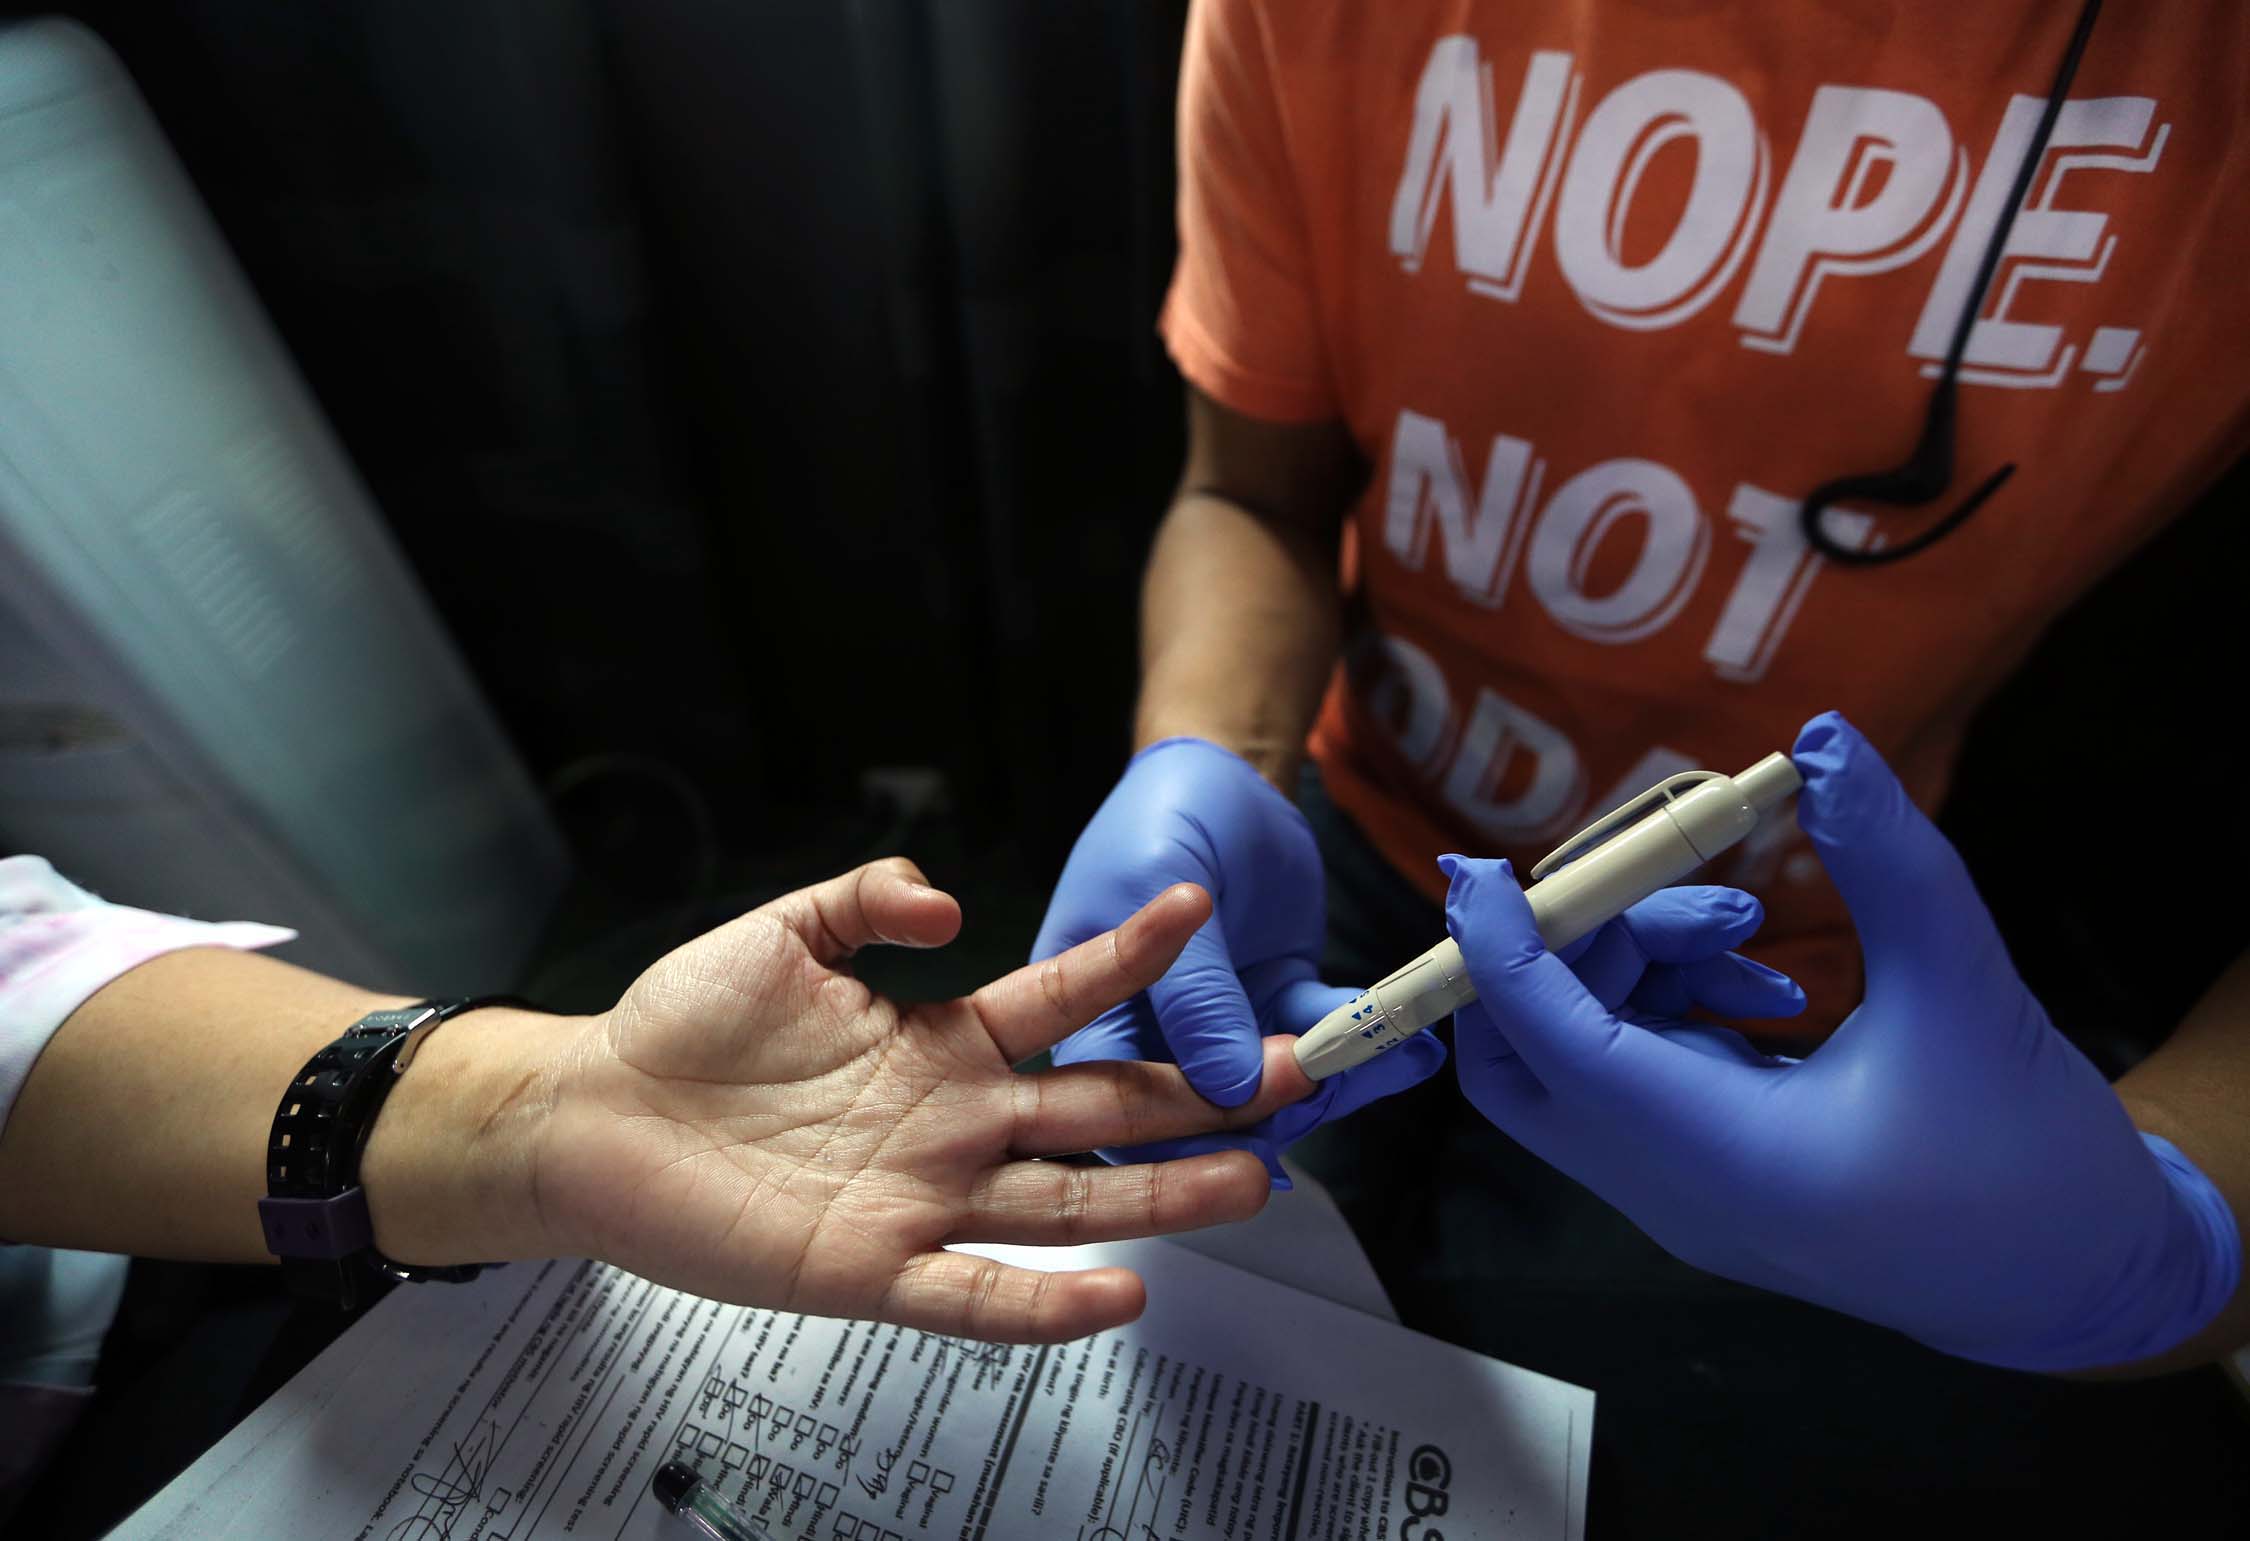 Minors may now volunteer for HIV testing under new law